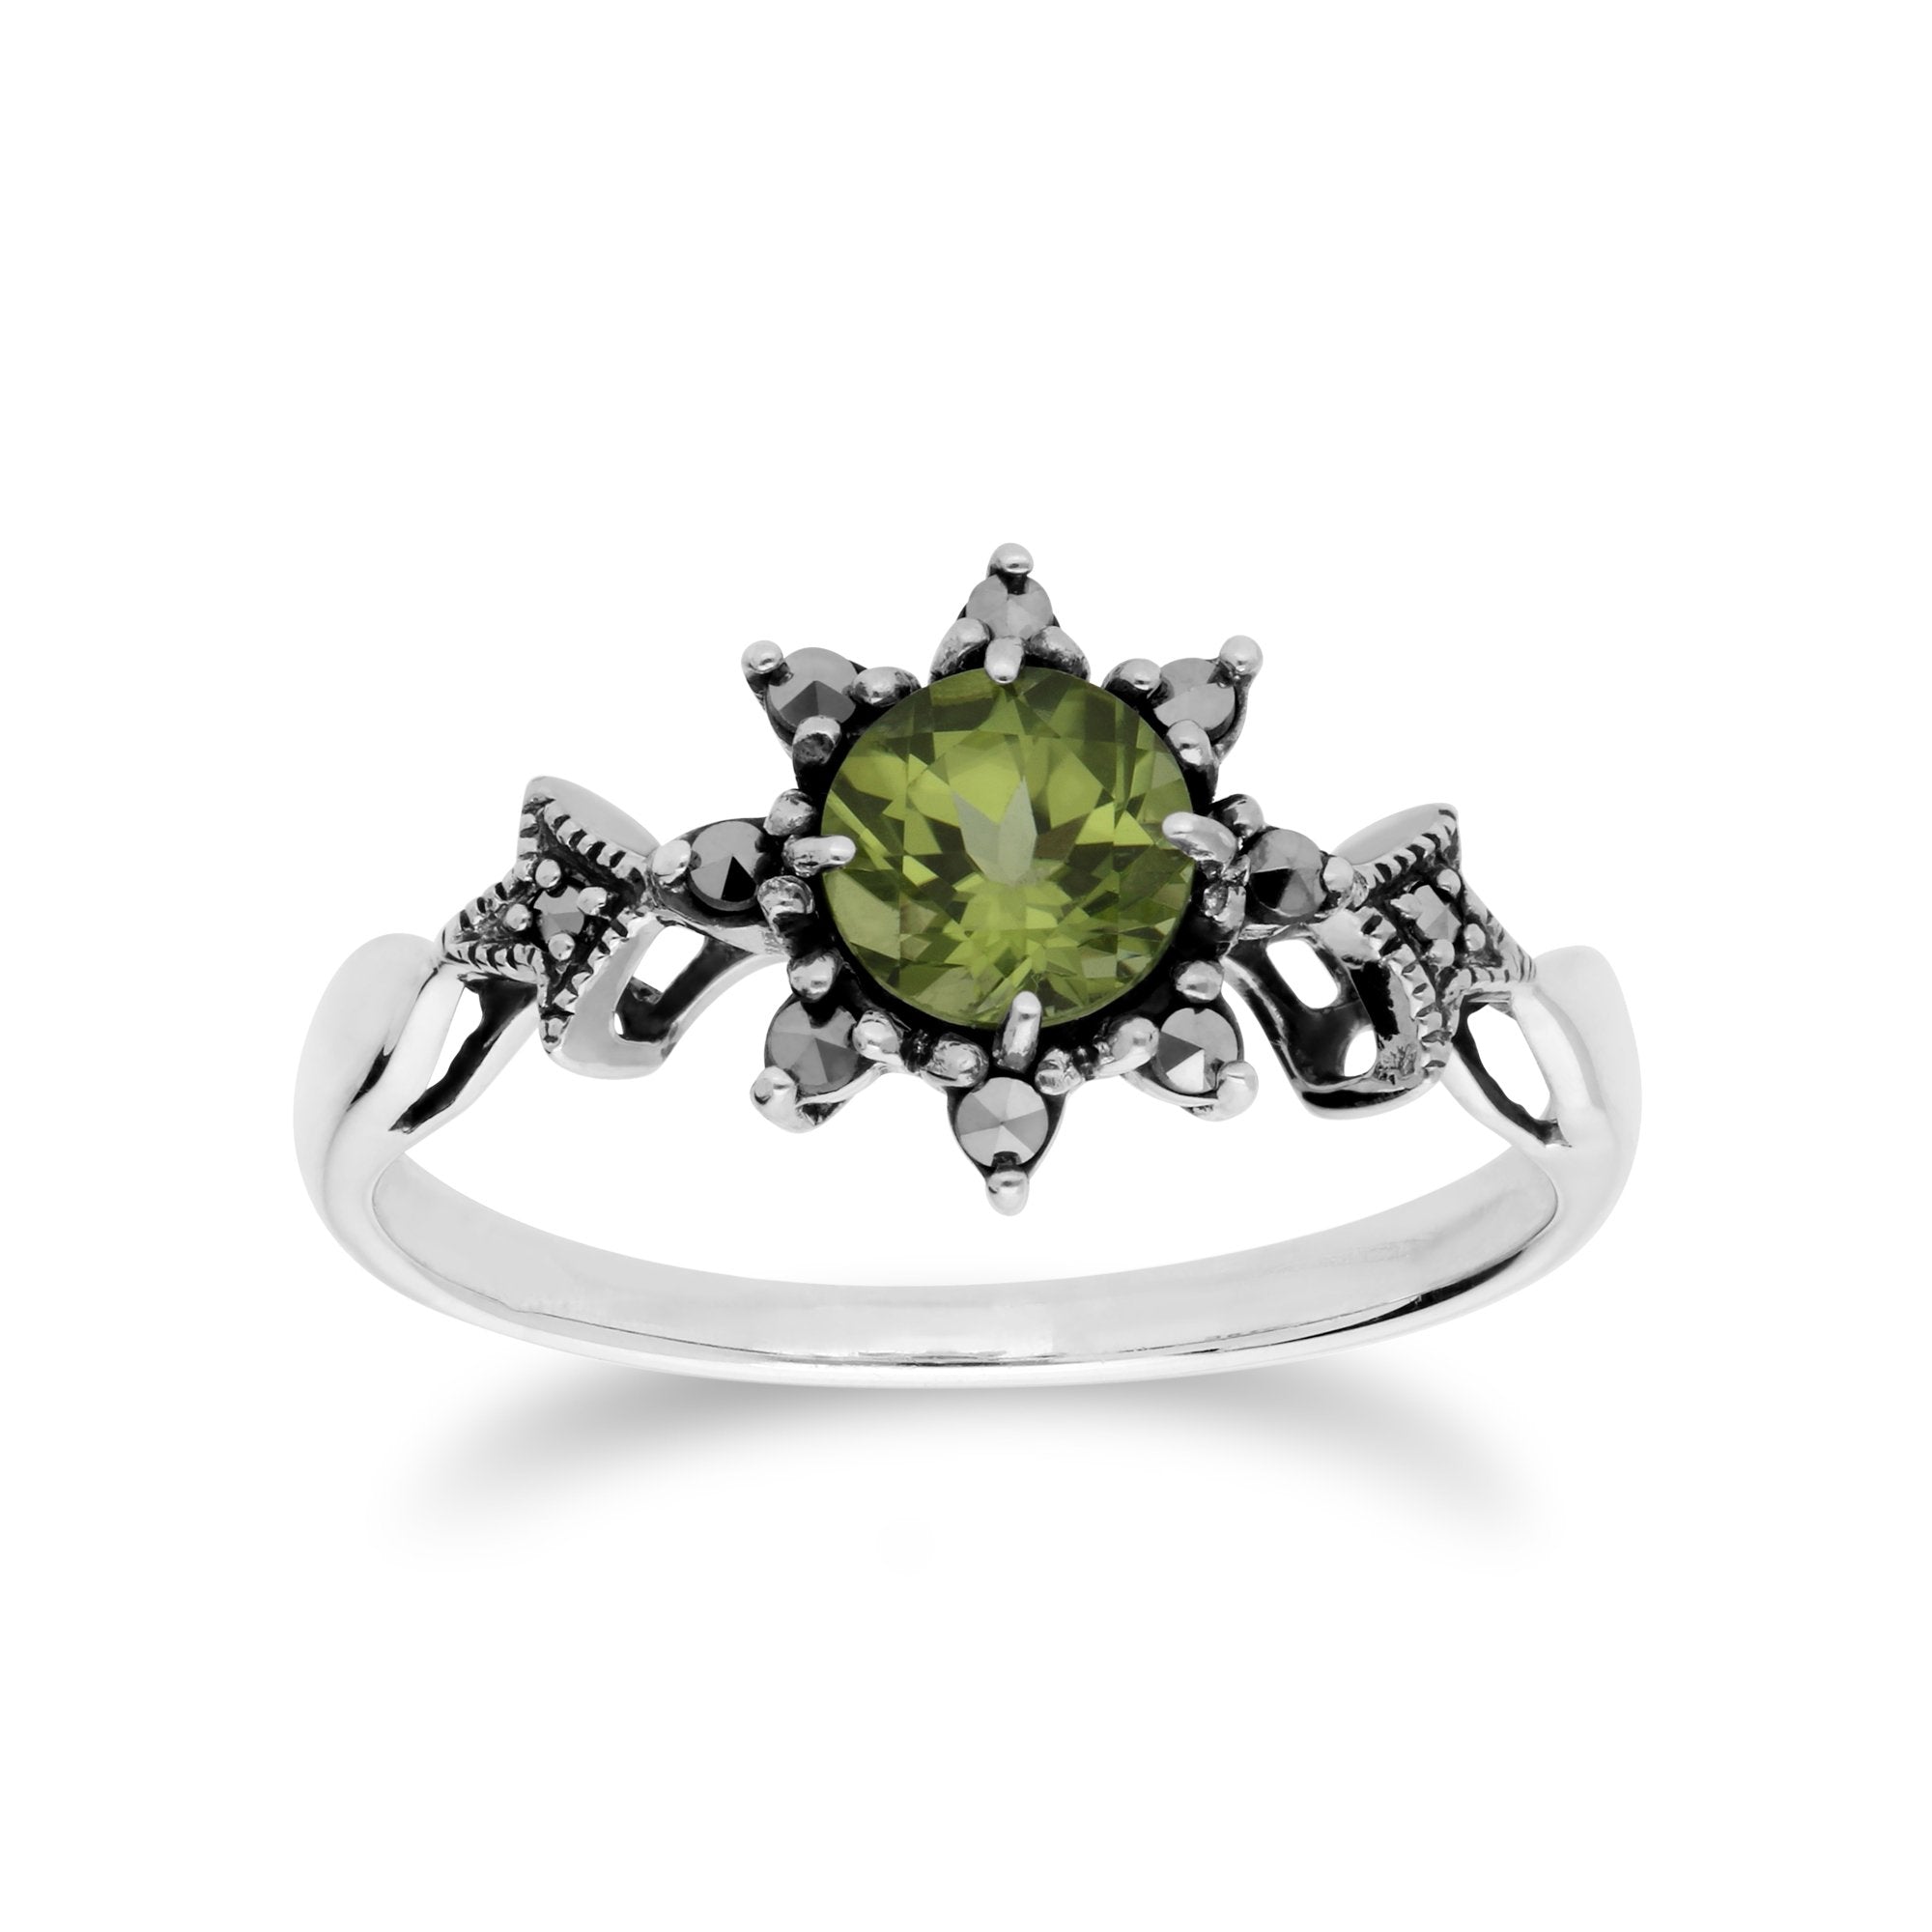 Art Deco Style Round Peridot & Marcasite Floral Ring in 925 Sterling Silver